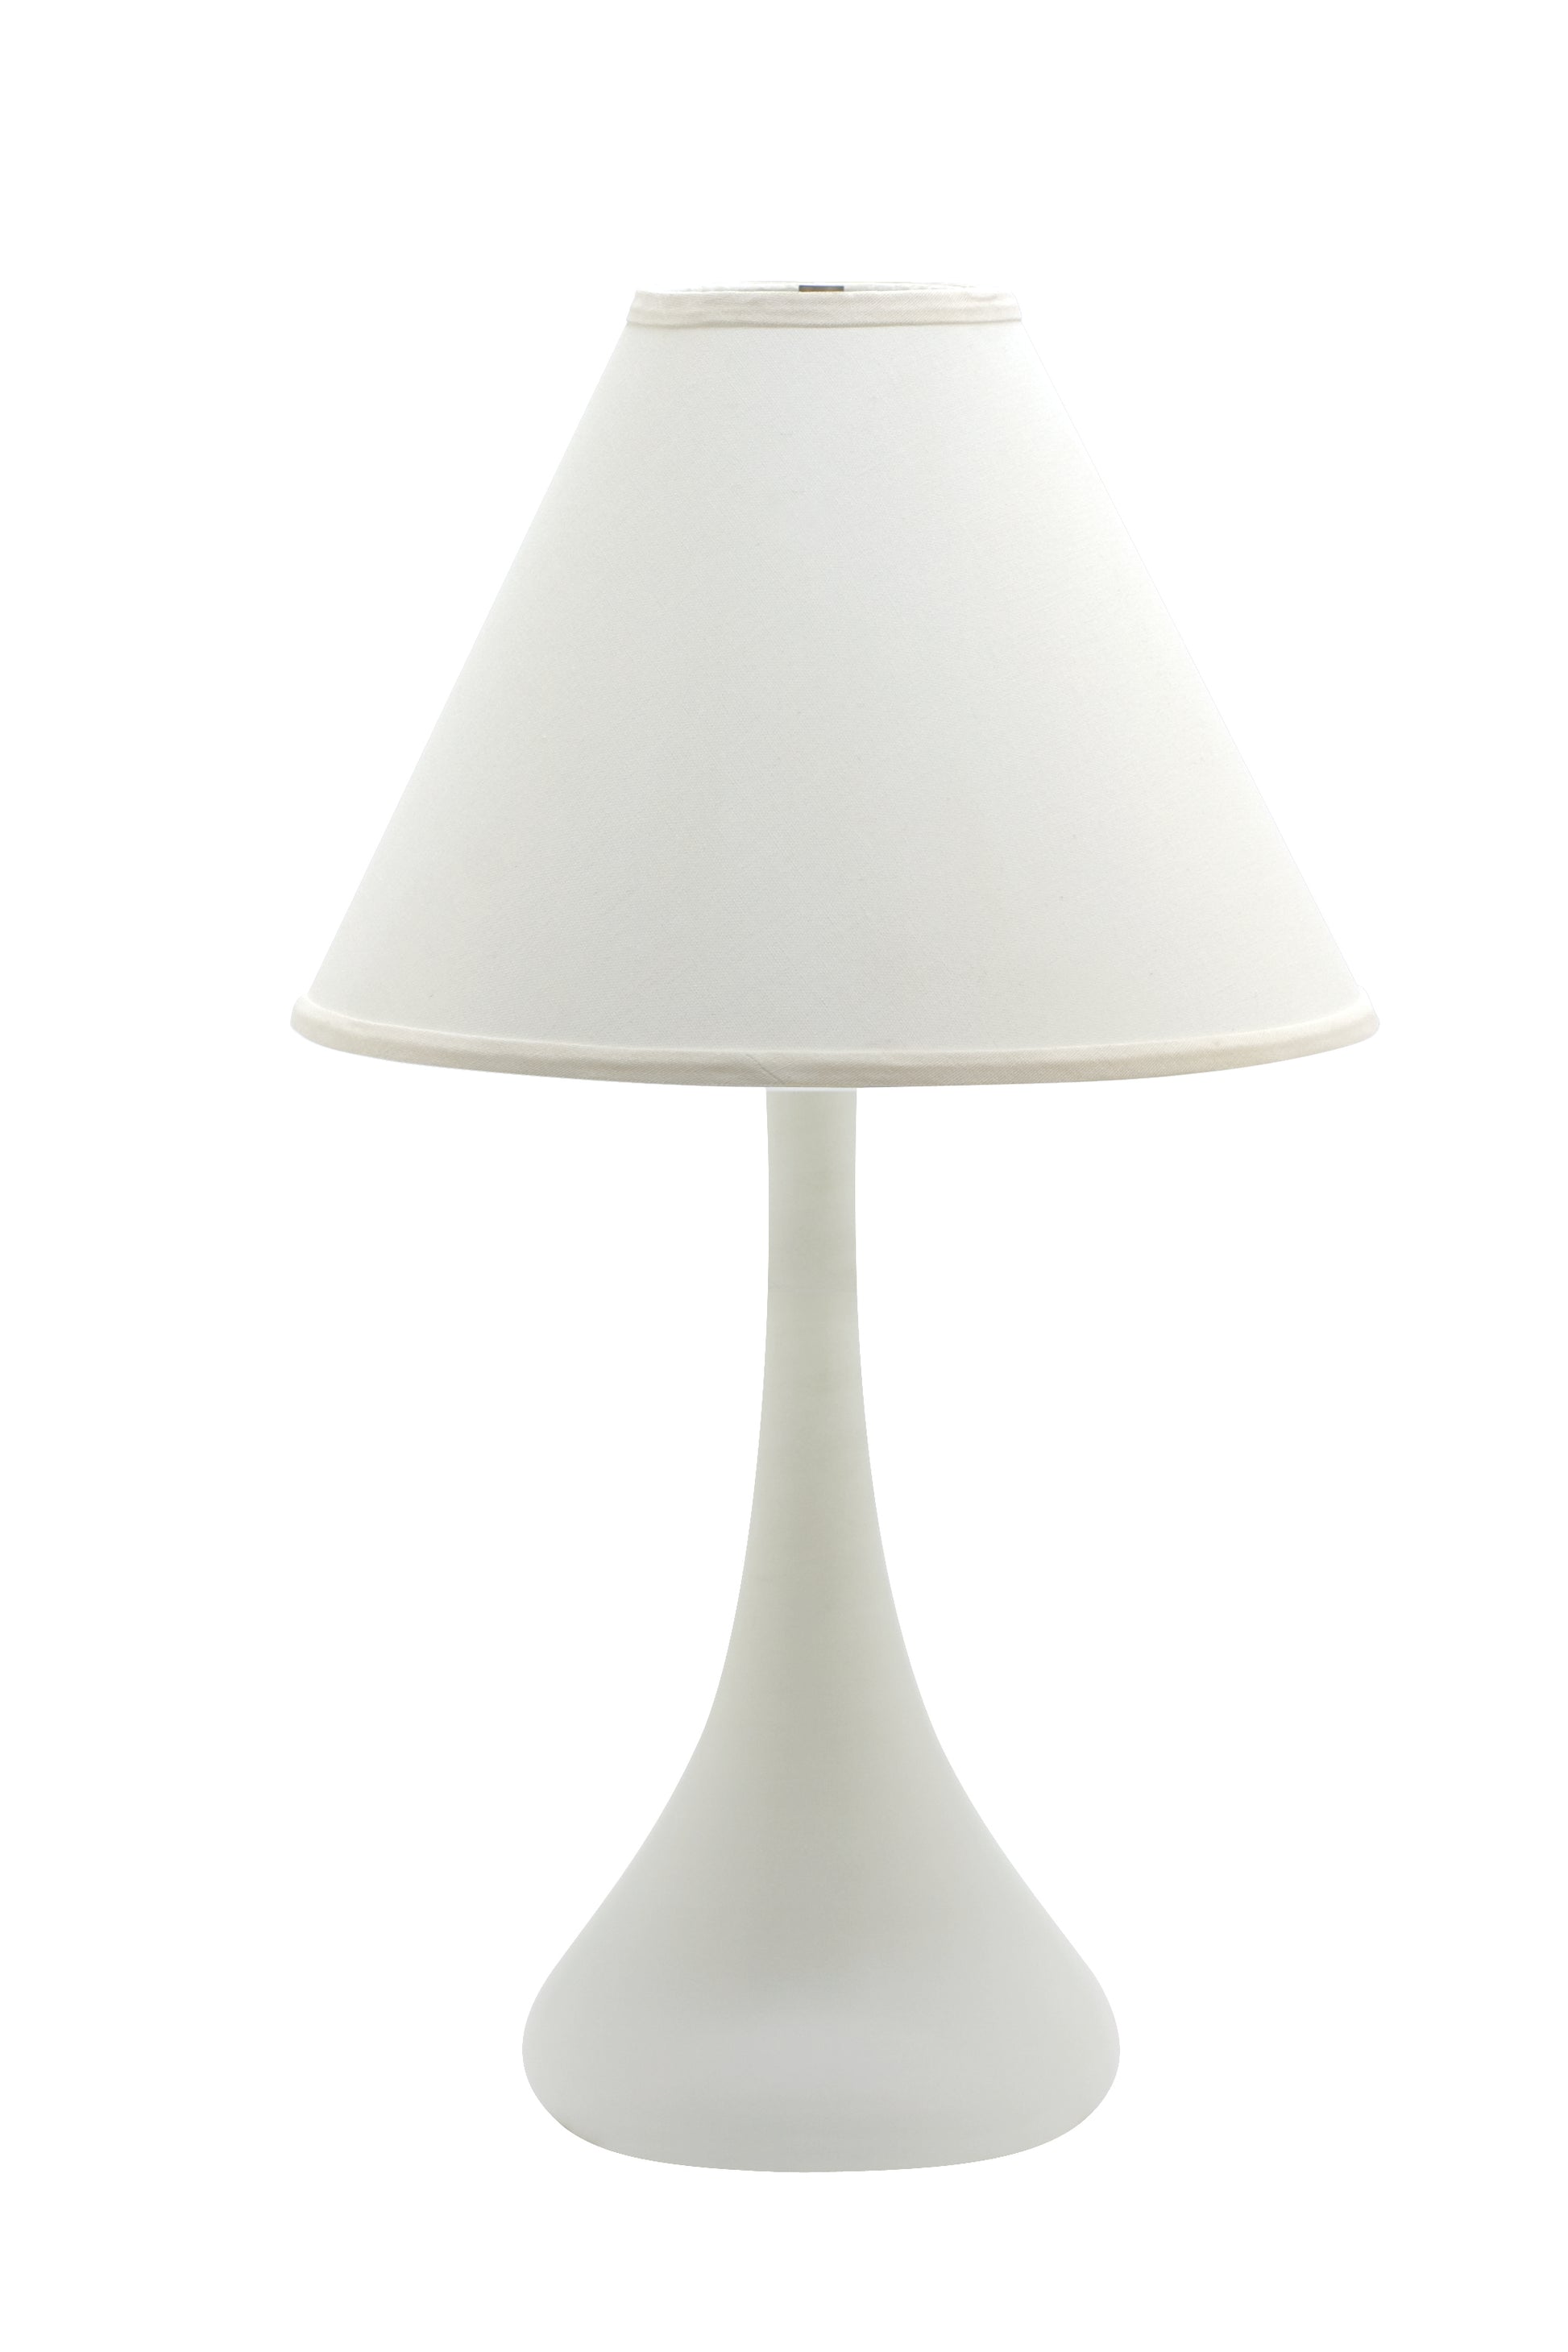 House of Troy Scatchard 26" Stoneware Table Lamp in White Matte GS801-WM